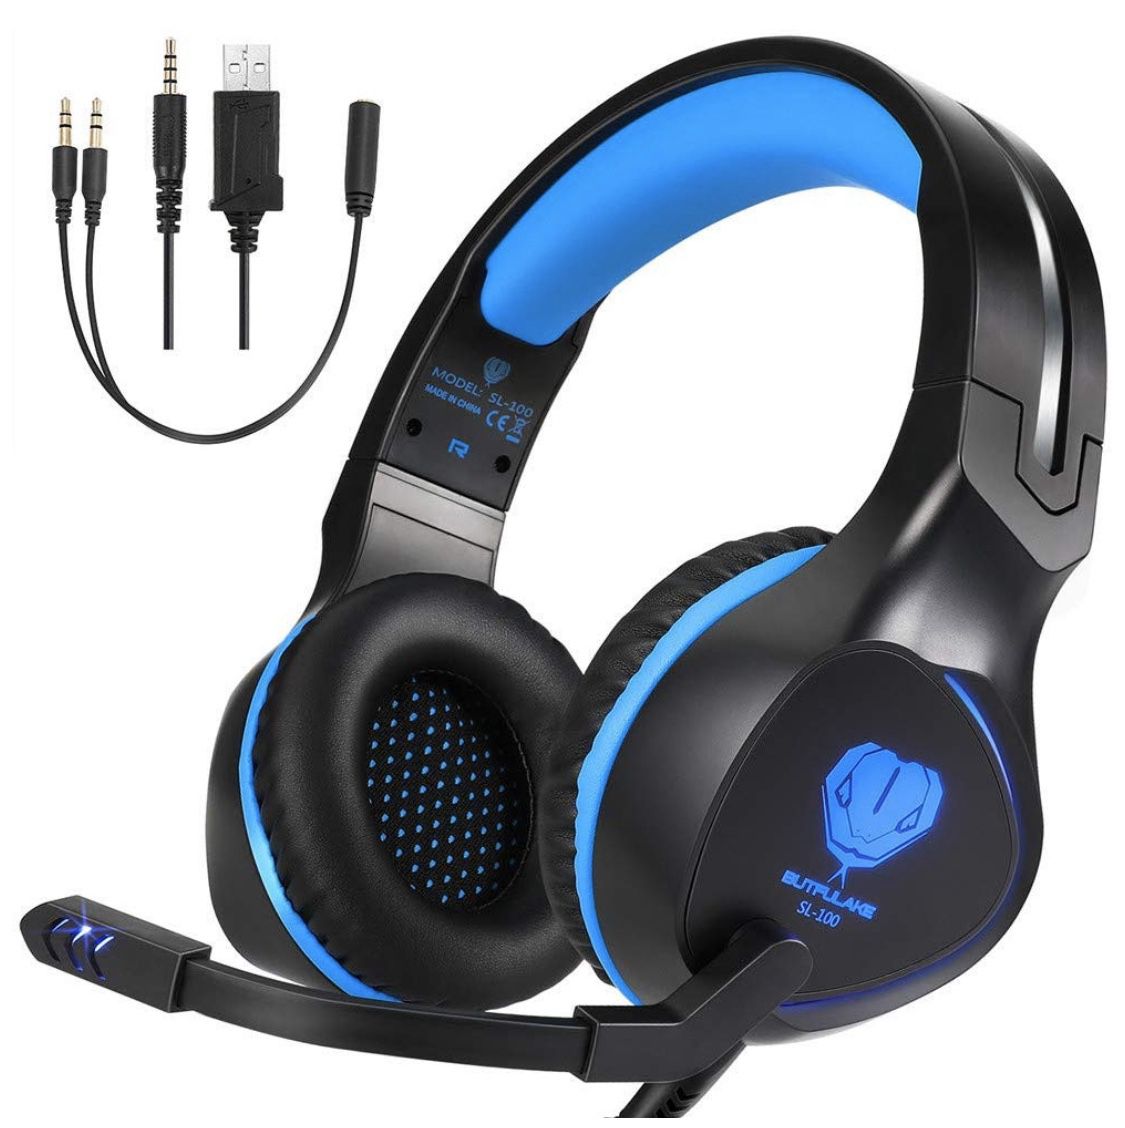 Xbox One Headset, Gaming Headset for Xbox One, Xbox One S, PS4, PC, Nintendo Switch, Laptop, Mac, Computer, 3.5mm Wired Over-Ear Gaming Headphones wi